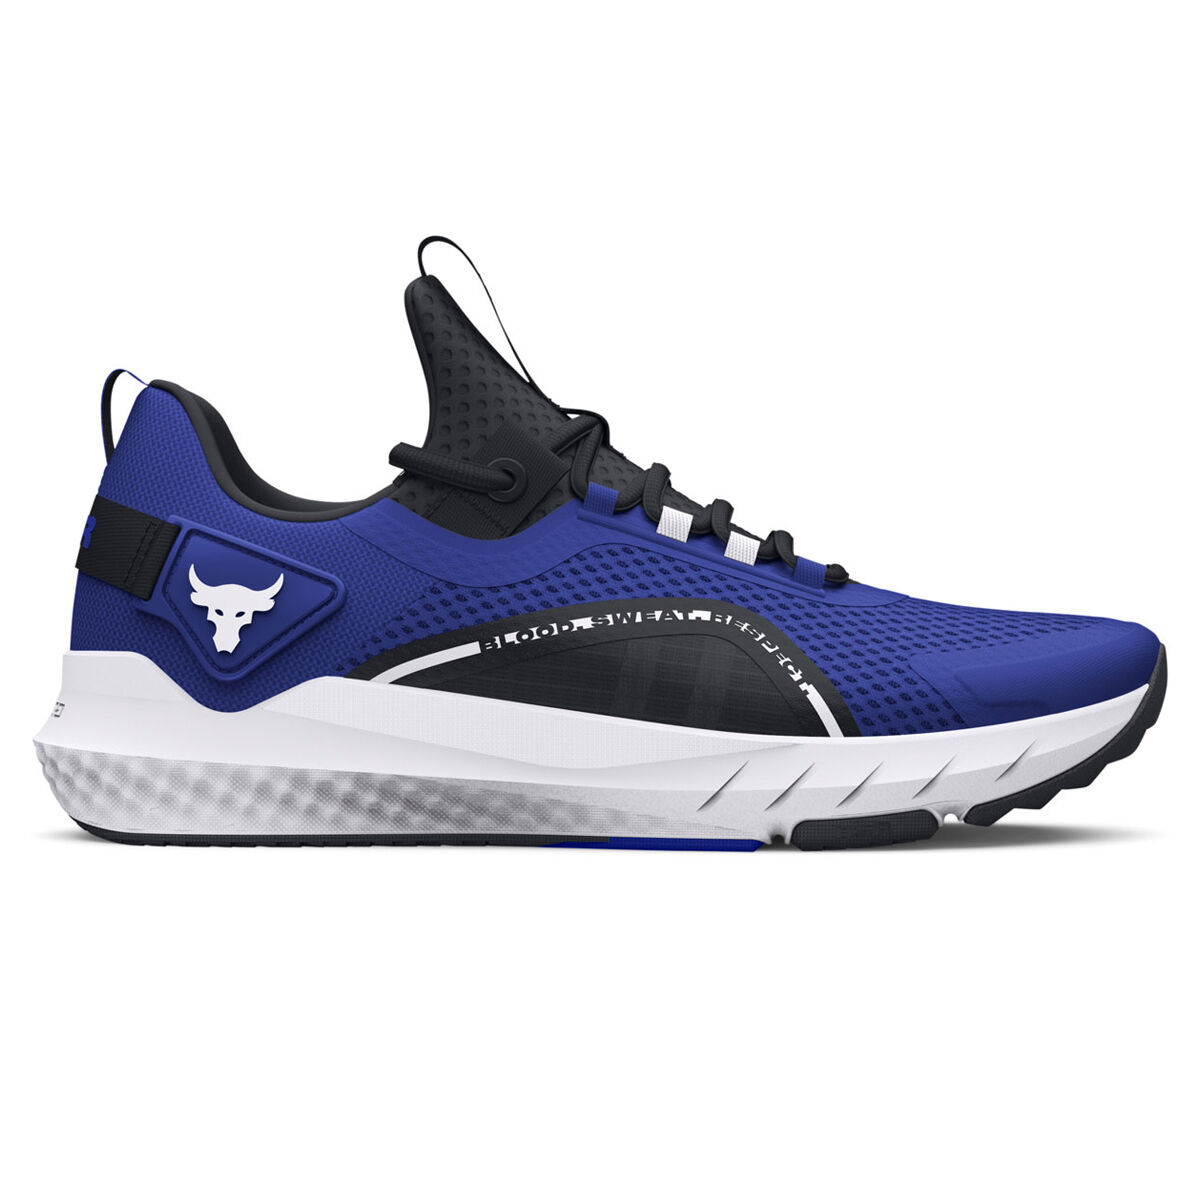 Under Armour, Project Rock BSR 3 Men's Training Shoes